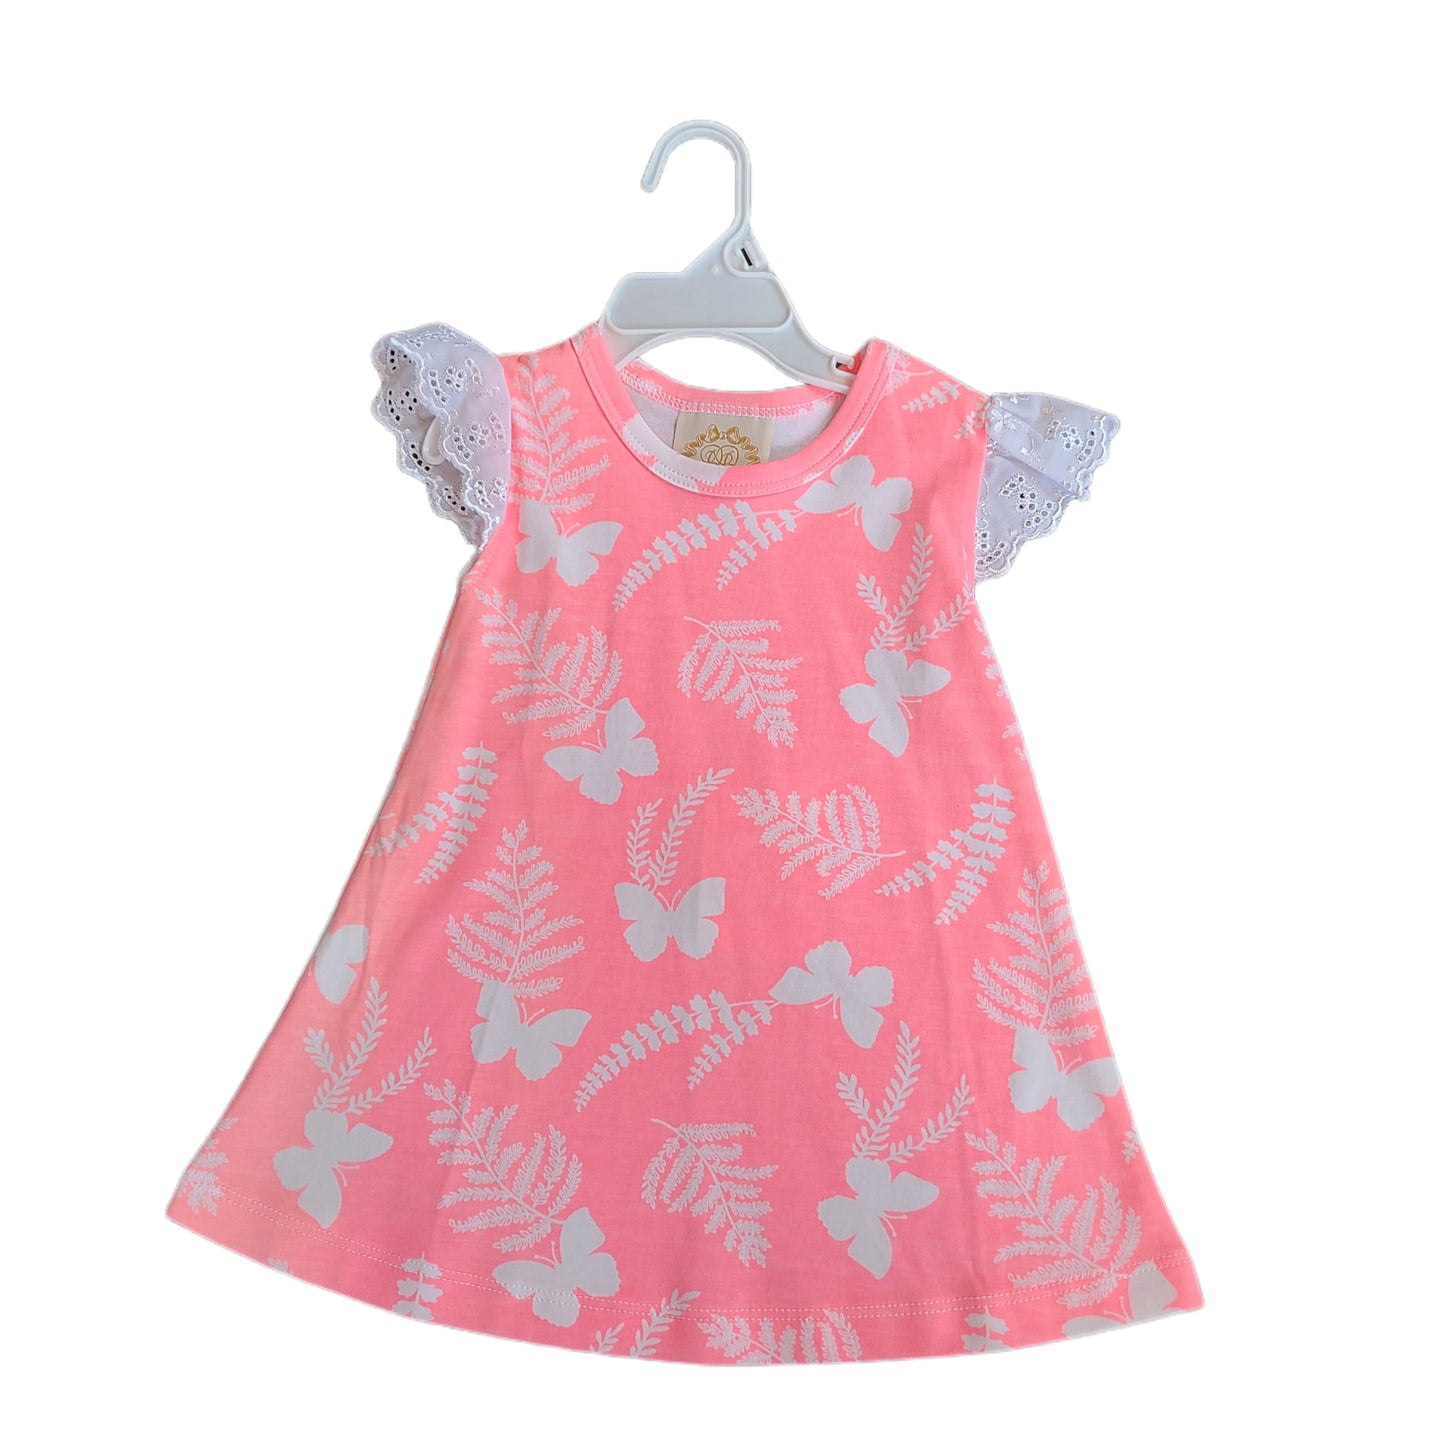 TBBC Polly Play Dress Front Porch Fern